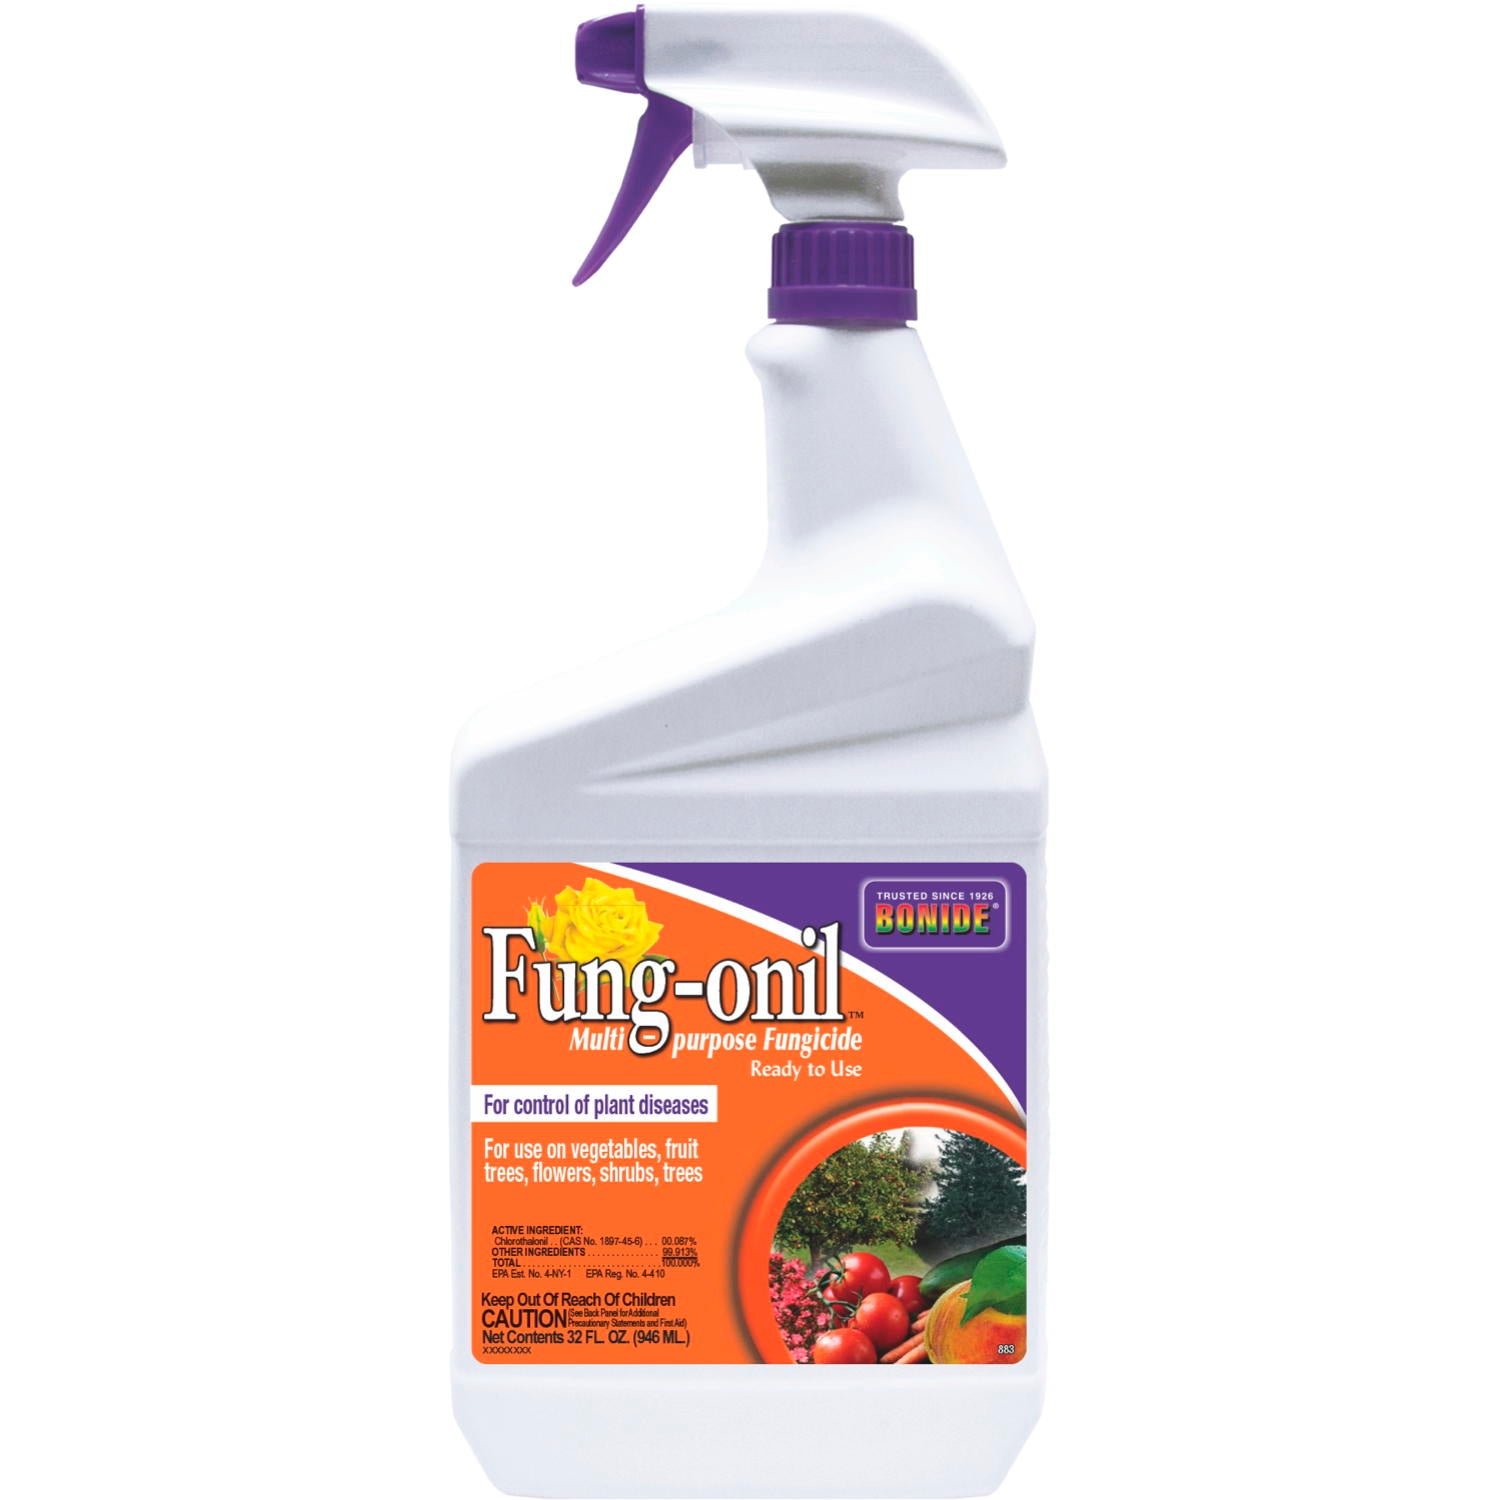 Easy to use, multi purpose fungicide for vegetables and shrubs